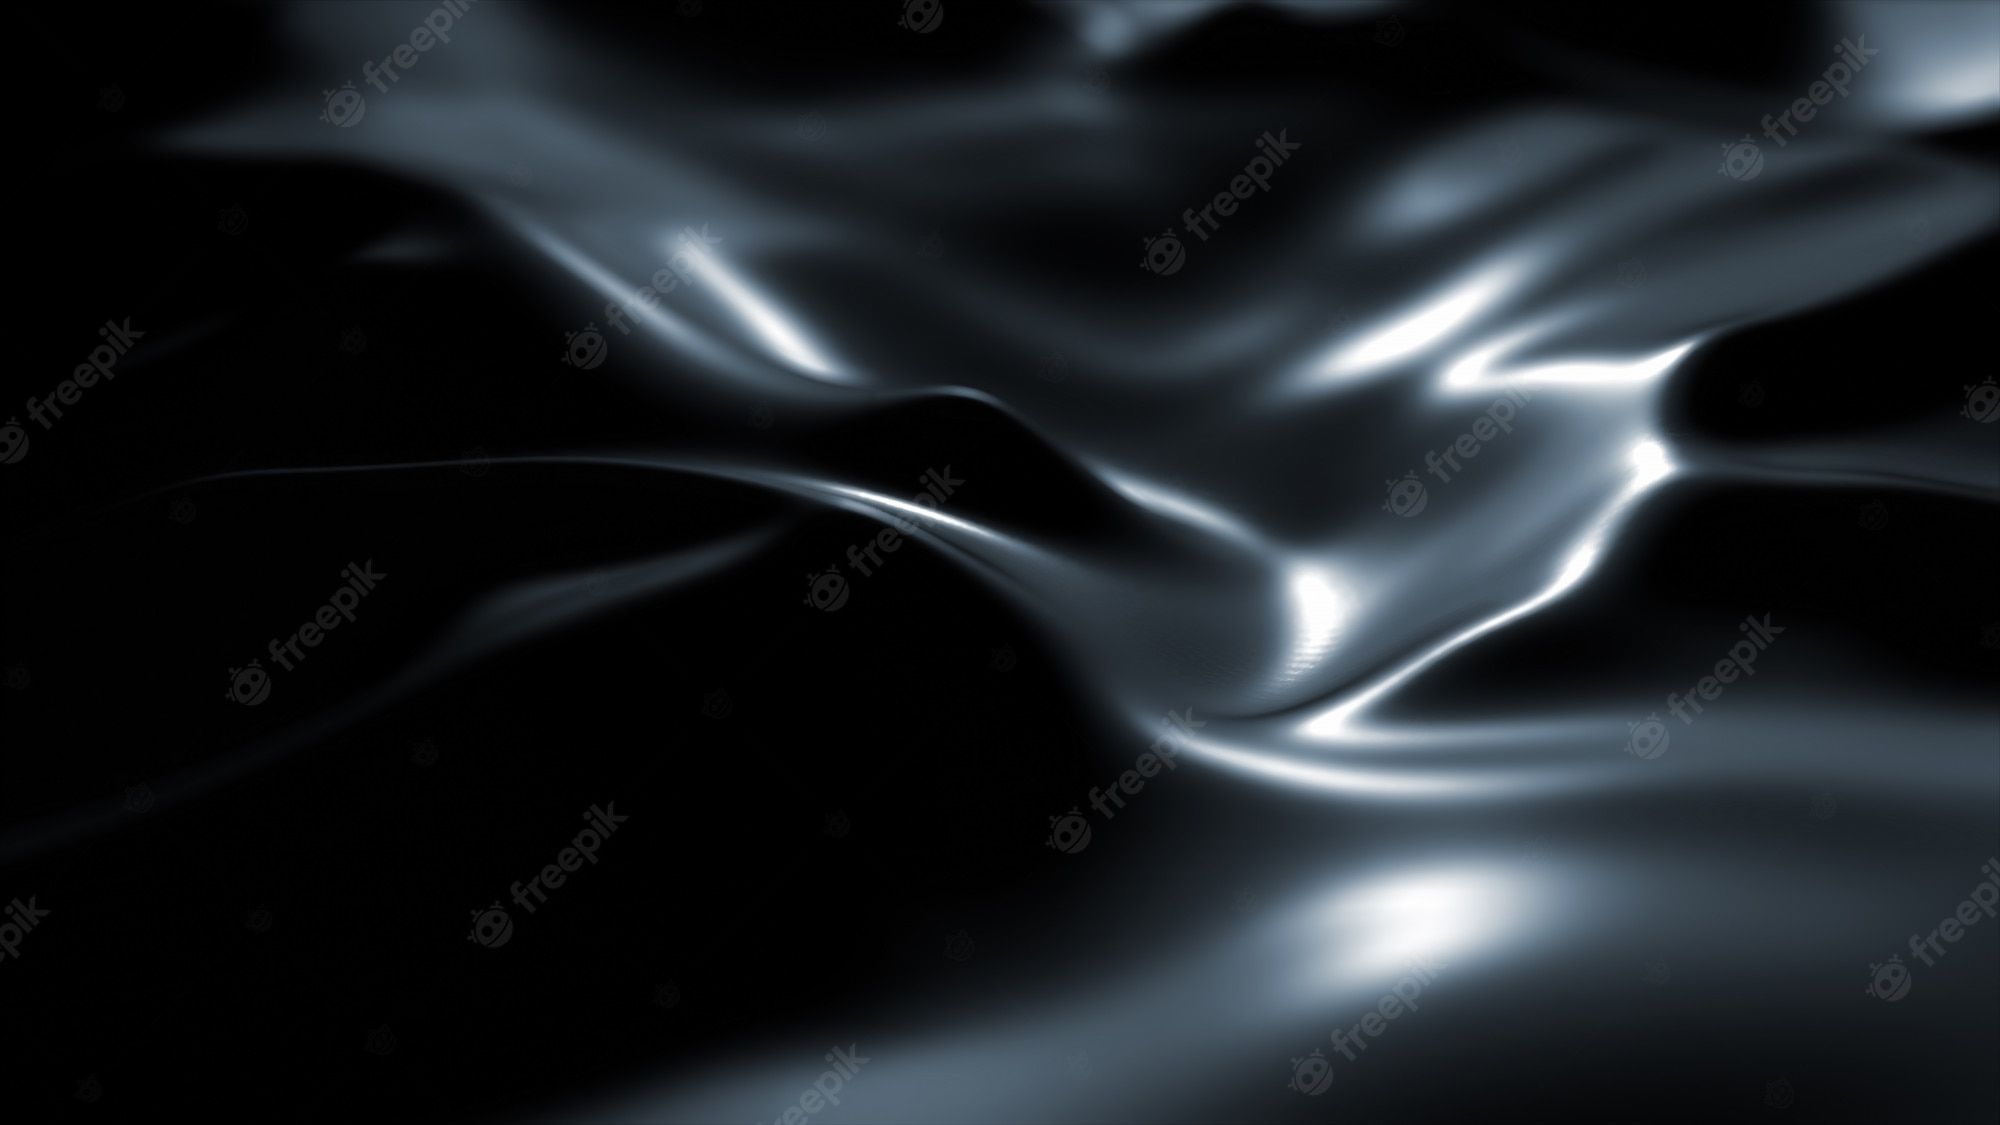 A computer generated image of a rippling black liquid - Blurry